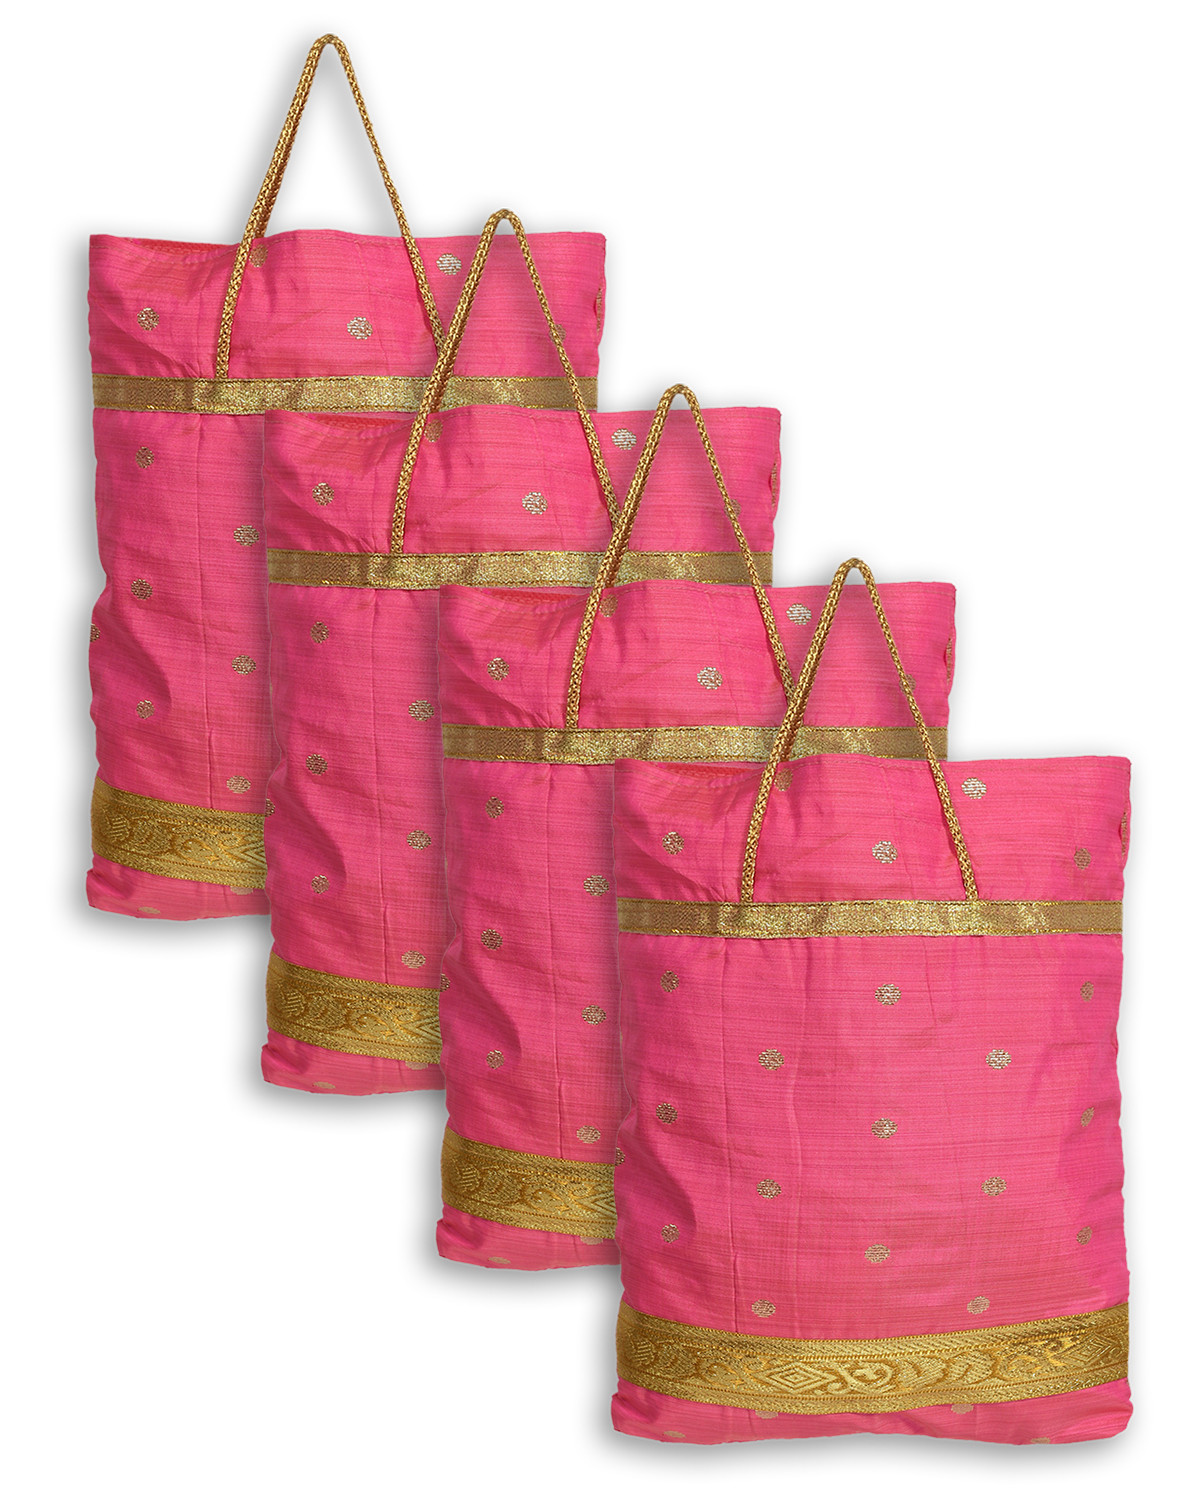 Kuber Industries Polyester Dot Print Hand Bag/Grocery Bag For Women/Girls With Handle (Pink) 54KM4055